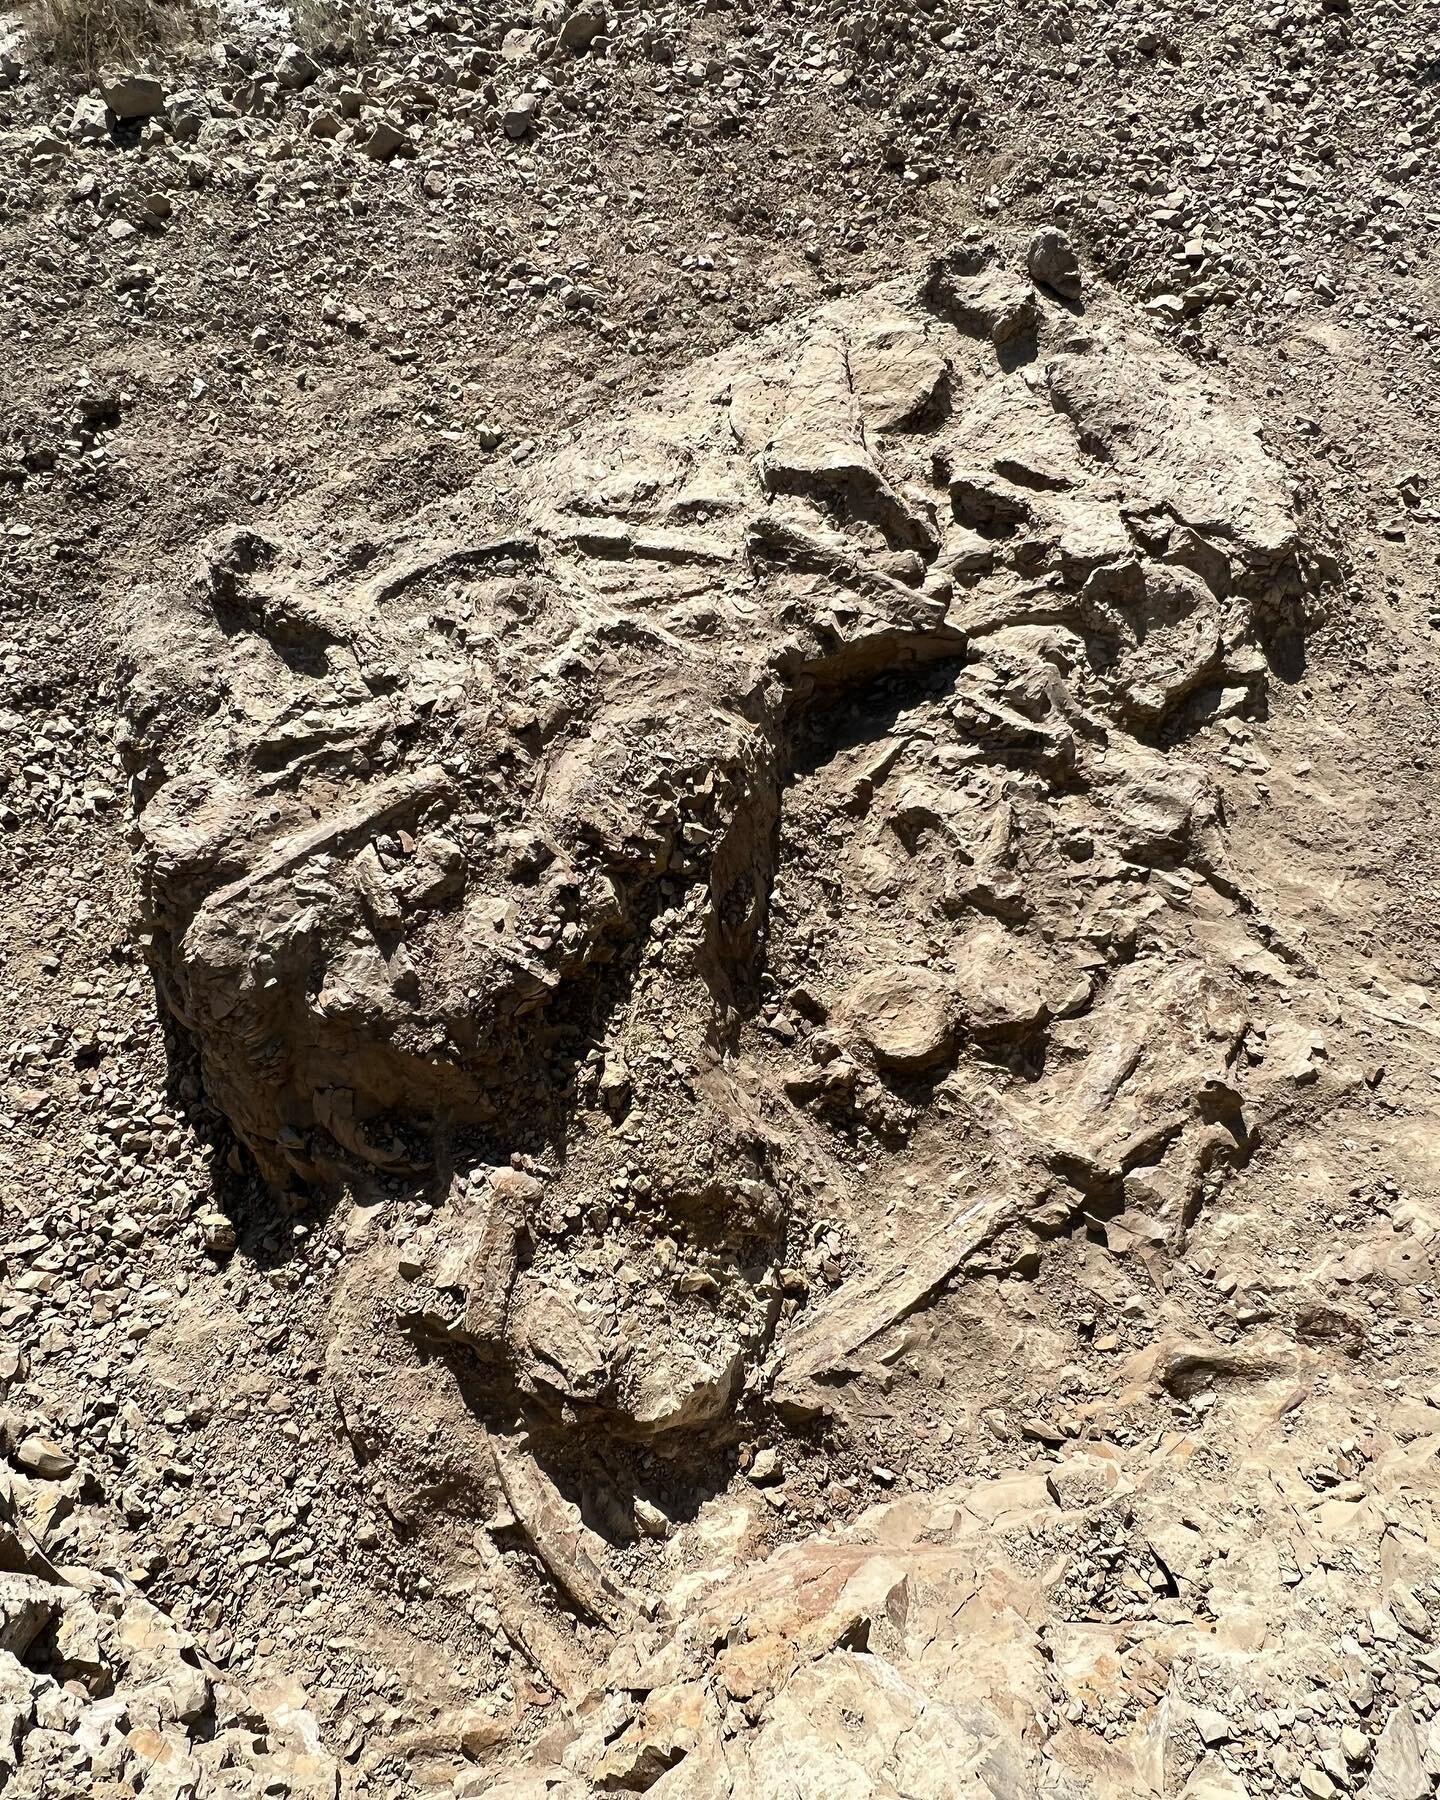 Triceratops anyone? Just a few pictures of my latest excavation. The site shows promise with elements of the skull and multiple vertebrae and ribs present. I&rsquo;m bringing in a backhoe tomorrow to expand the site and hopefully find more of the spe